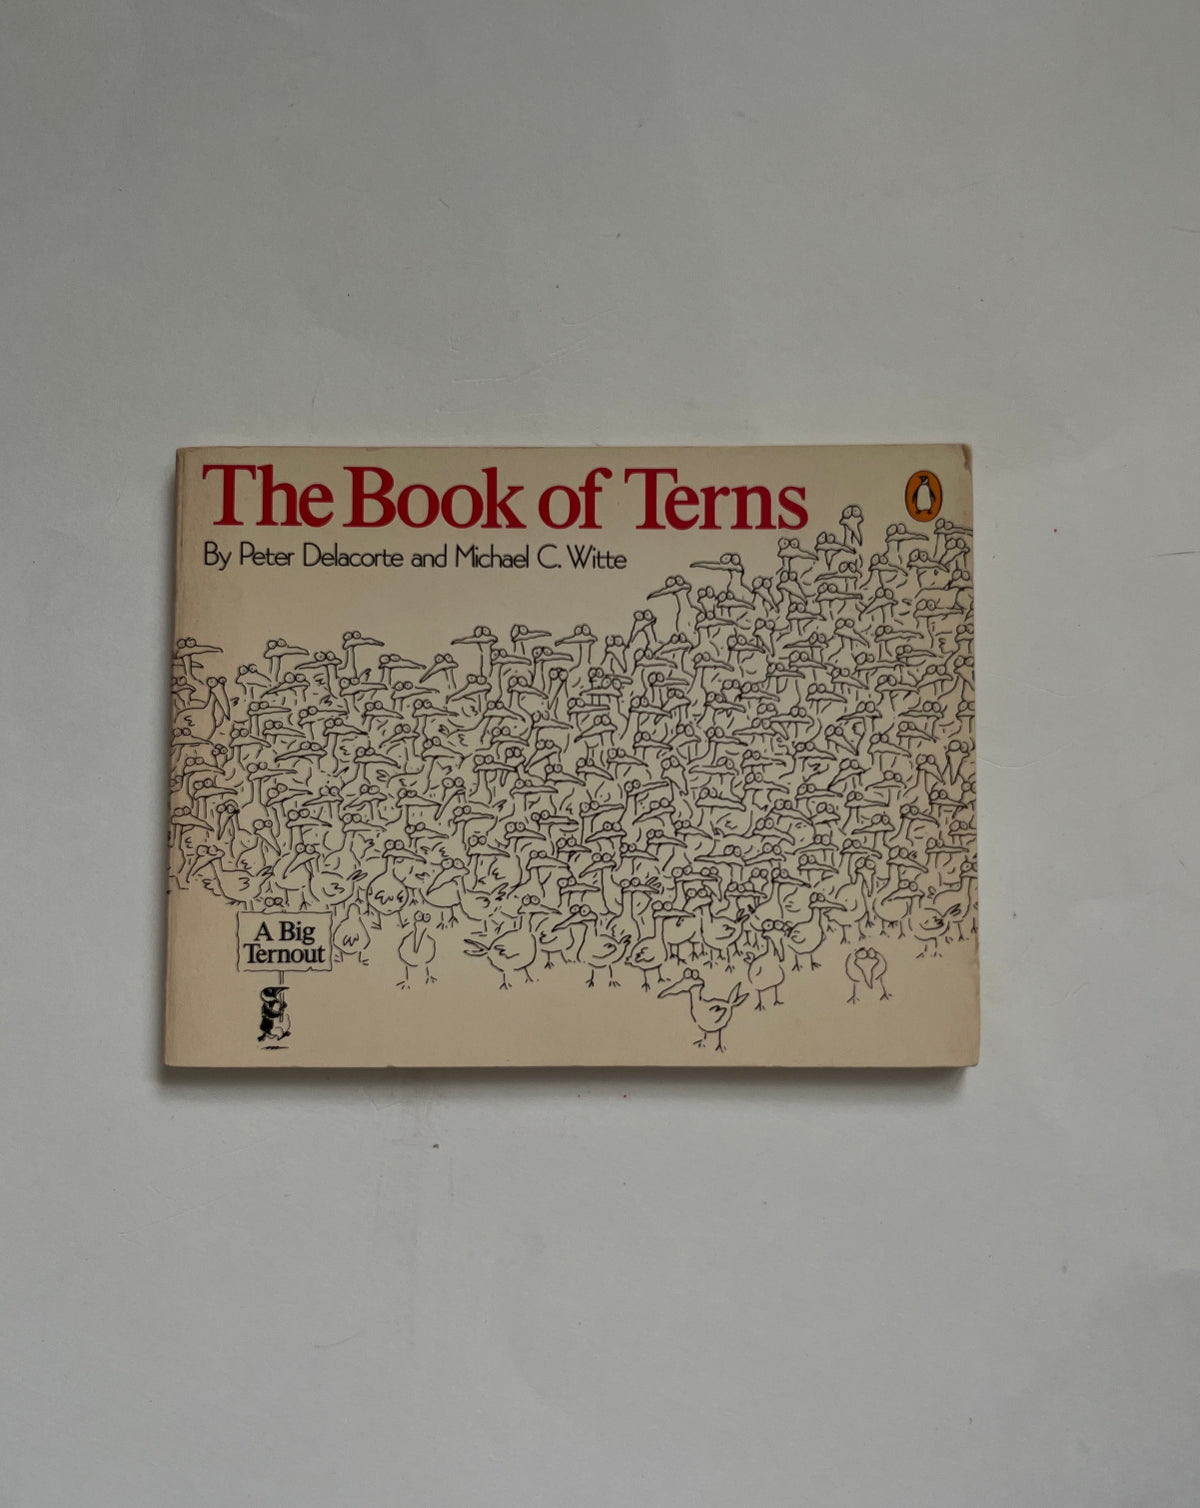 The Book of Terns by Peter Delacorte and Michael C. Witte